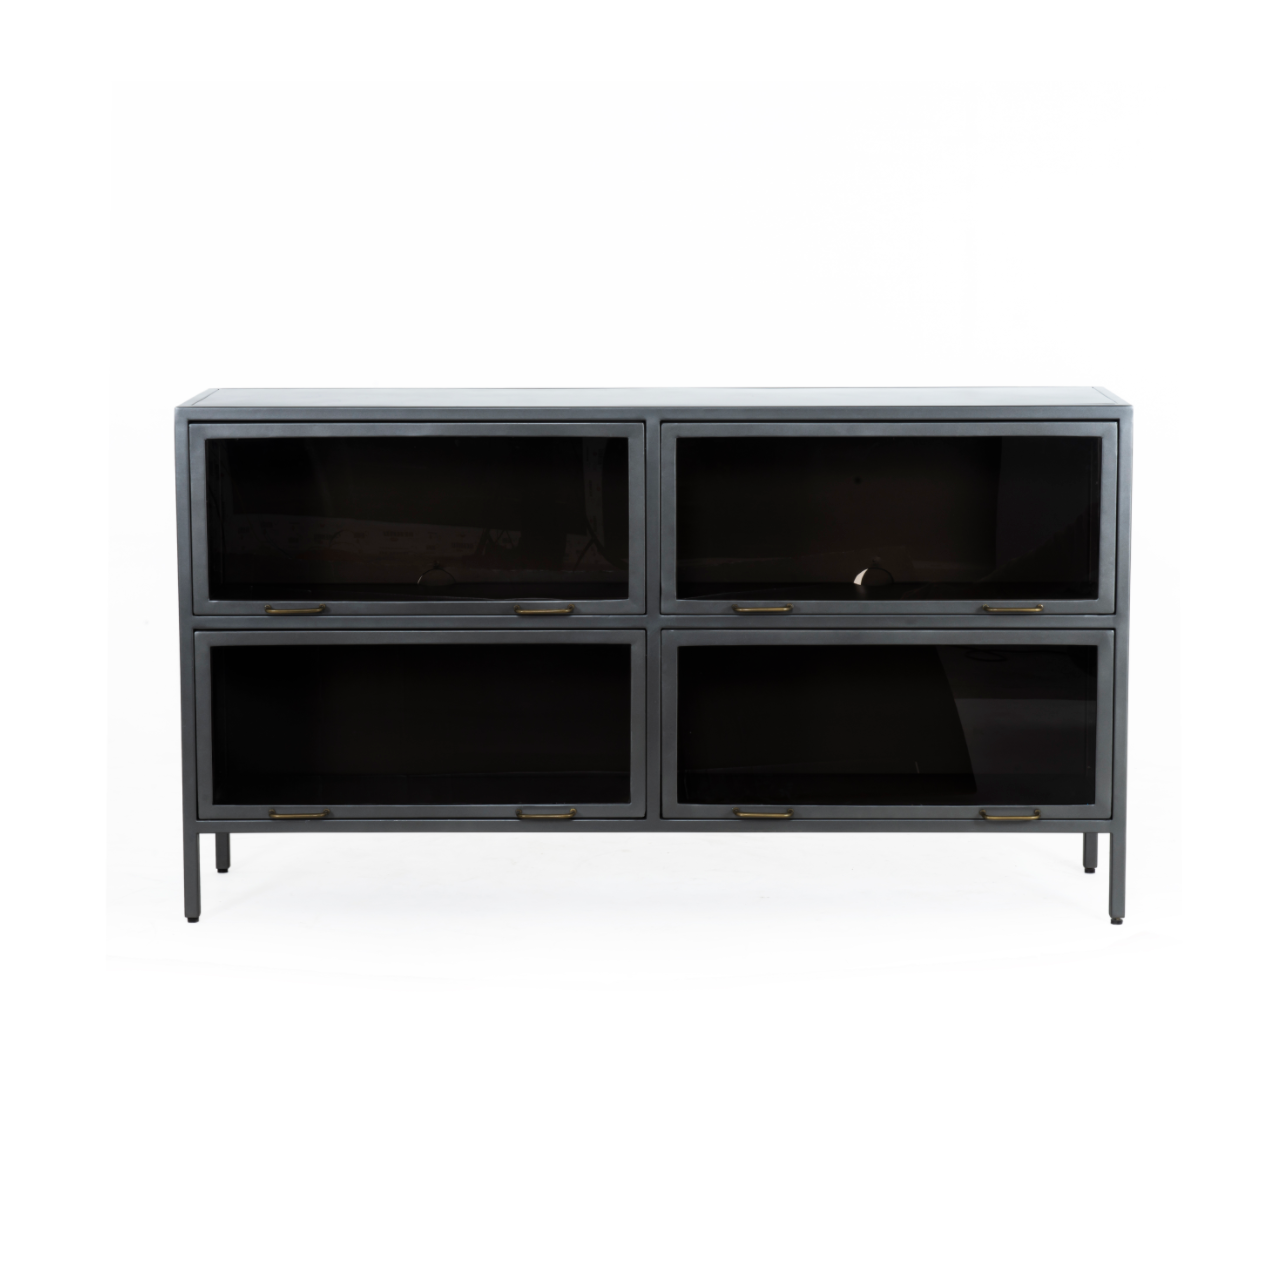 Inspired by the stackable barrister-style shelving, the Aviva Barrister Sideboard has iron casing finished in a gunmetal for a fresh industrial look, with smoked glass panes with brass hardware cover door fronts, each lifting to spacious compartments for storage of media, tableware and more.  Overall Dimensions: 65"w x 15"d x 36.5"h Colors: Smoked Glass, Flat Brass, Gunmetal Materials: Glass, Iron